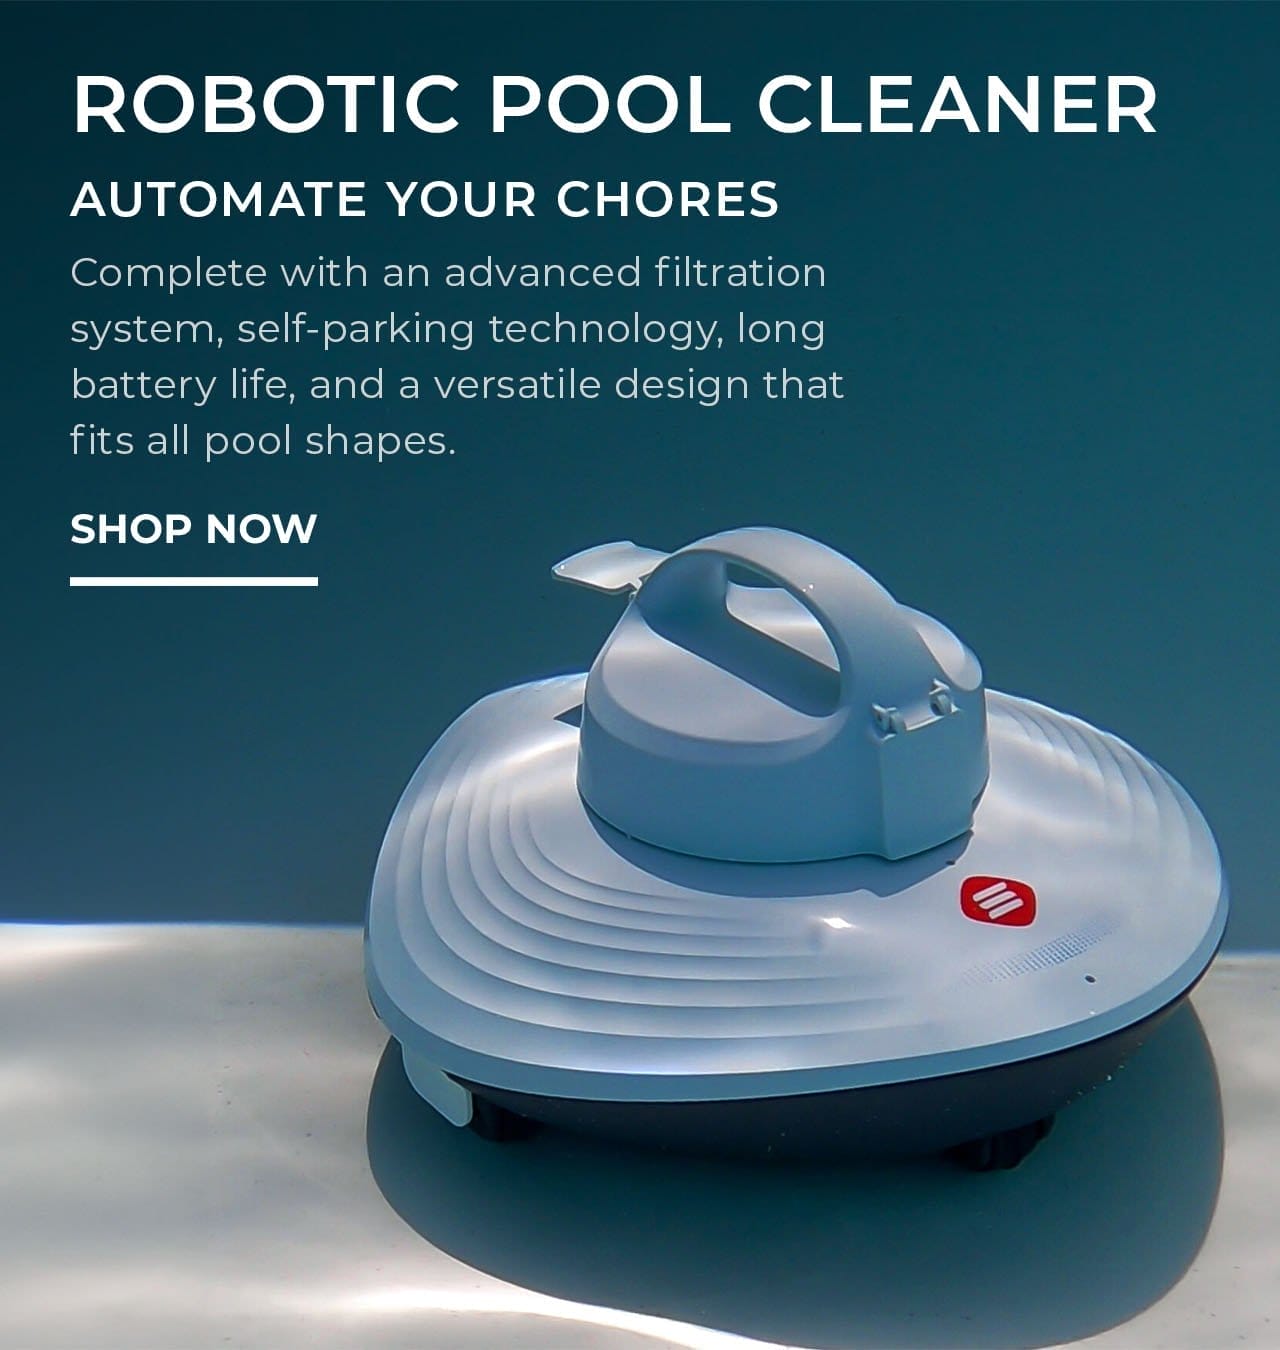 Robotic Pool Cleaner | SHOP NOW